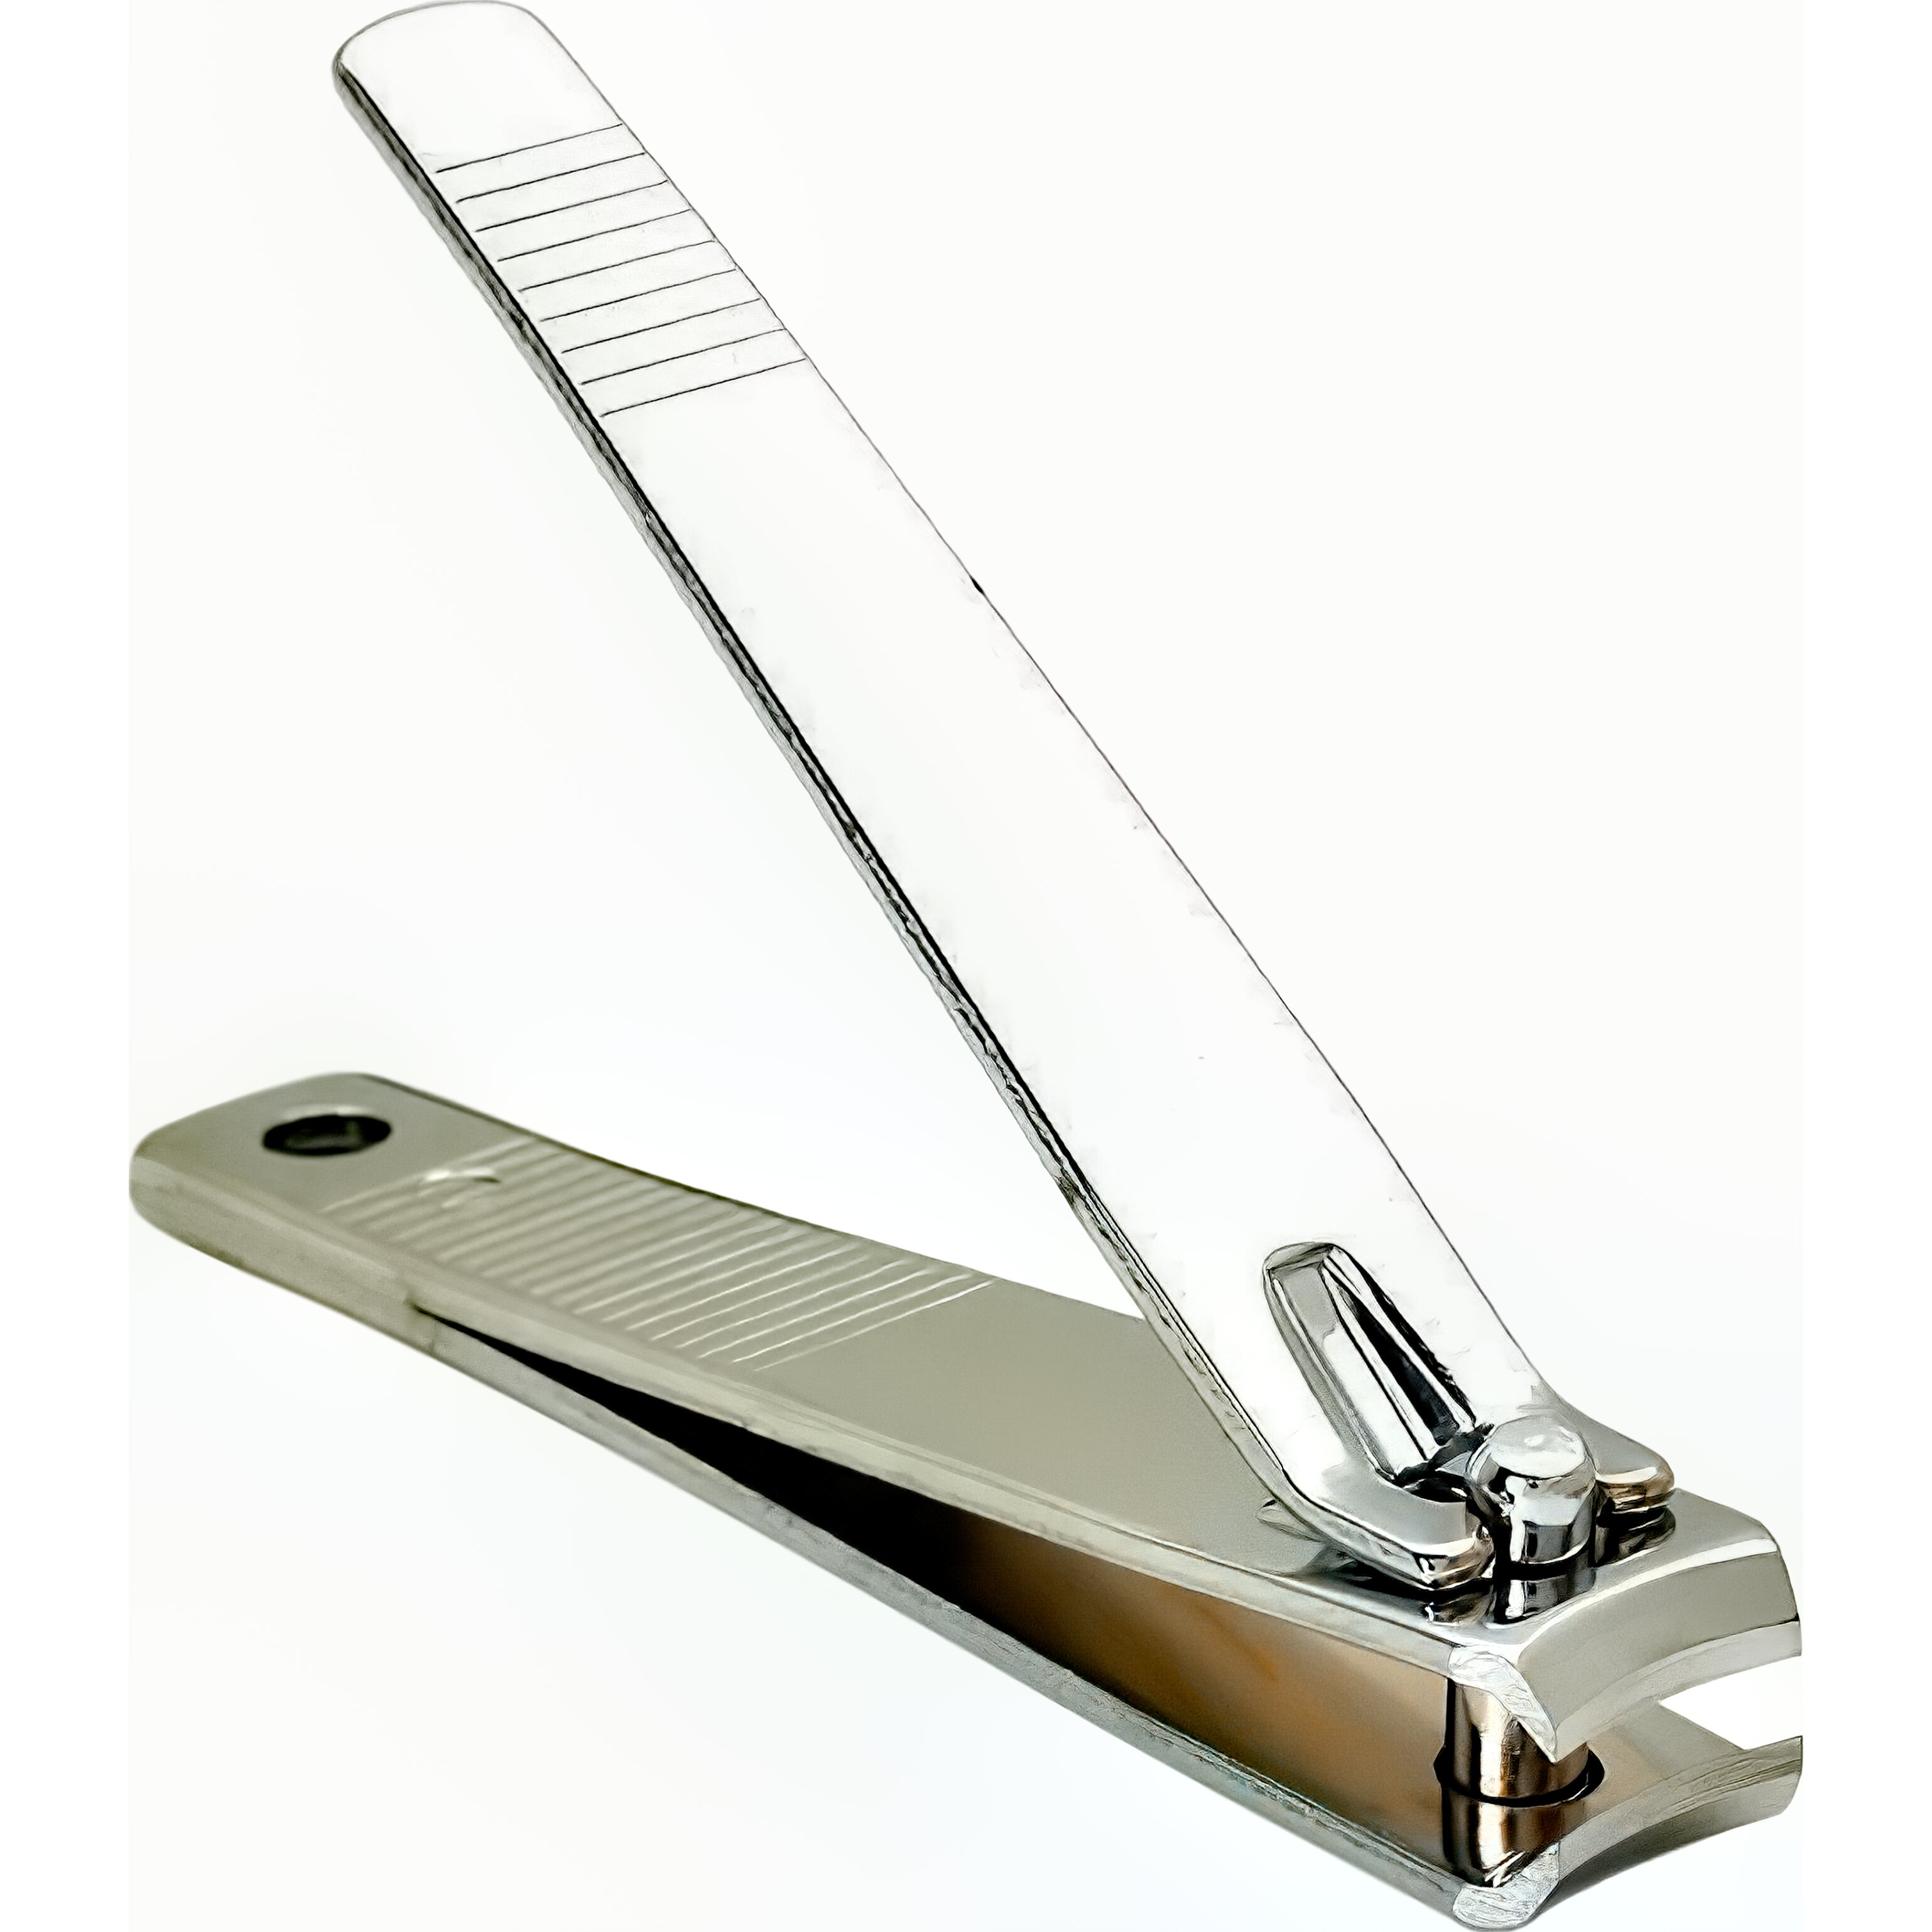 Findingking Toe Nail Clippers 3 1/4"